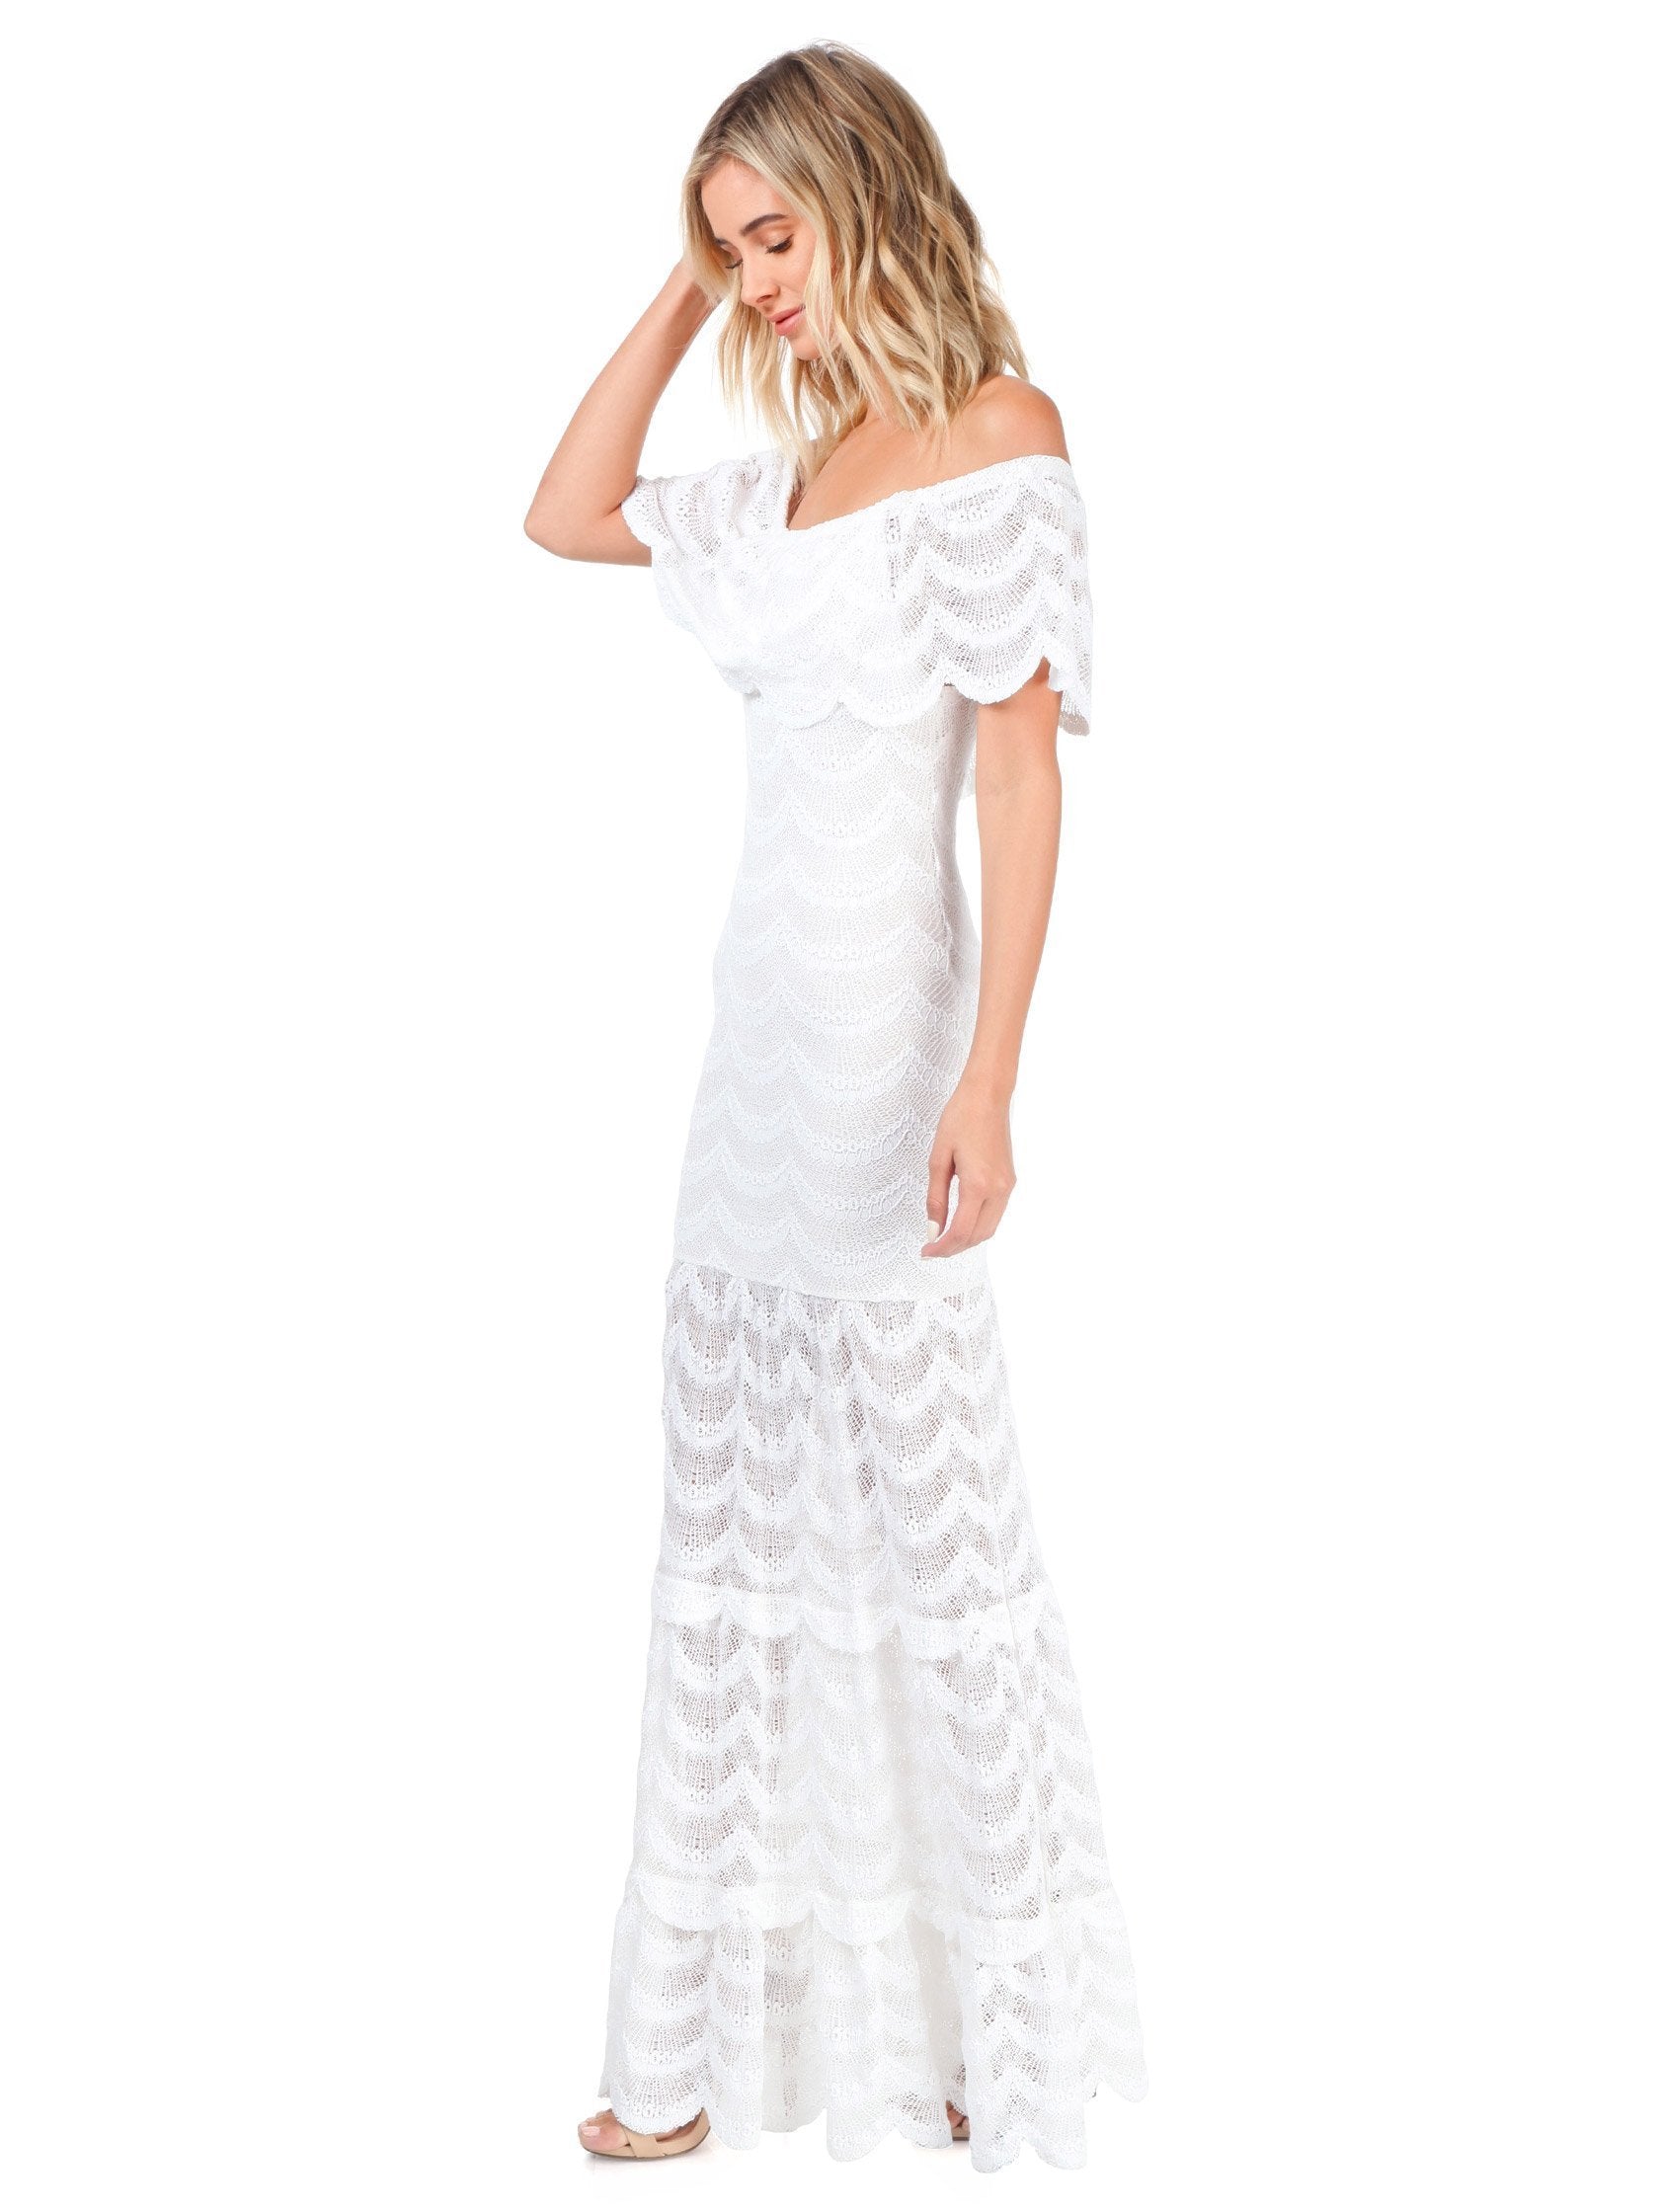 Women outfit in a dress rental from Nightcap Clothing called Fiesta Fan Lace Positano Maxi